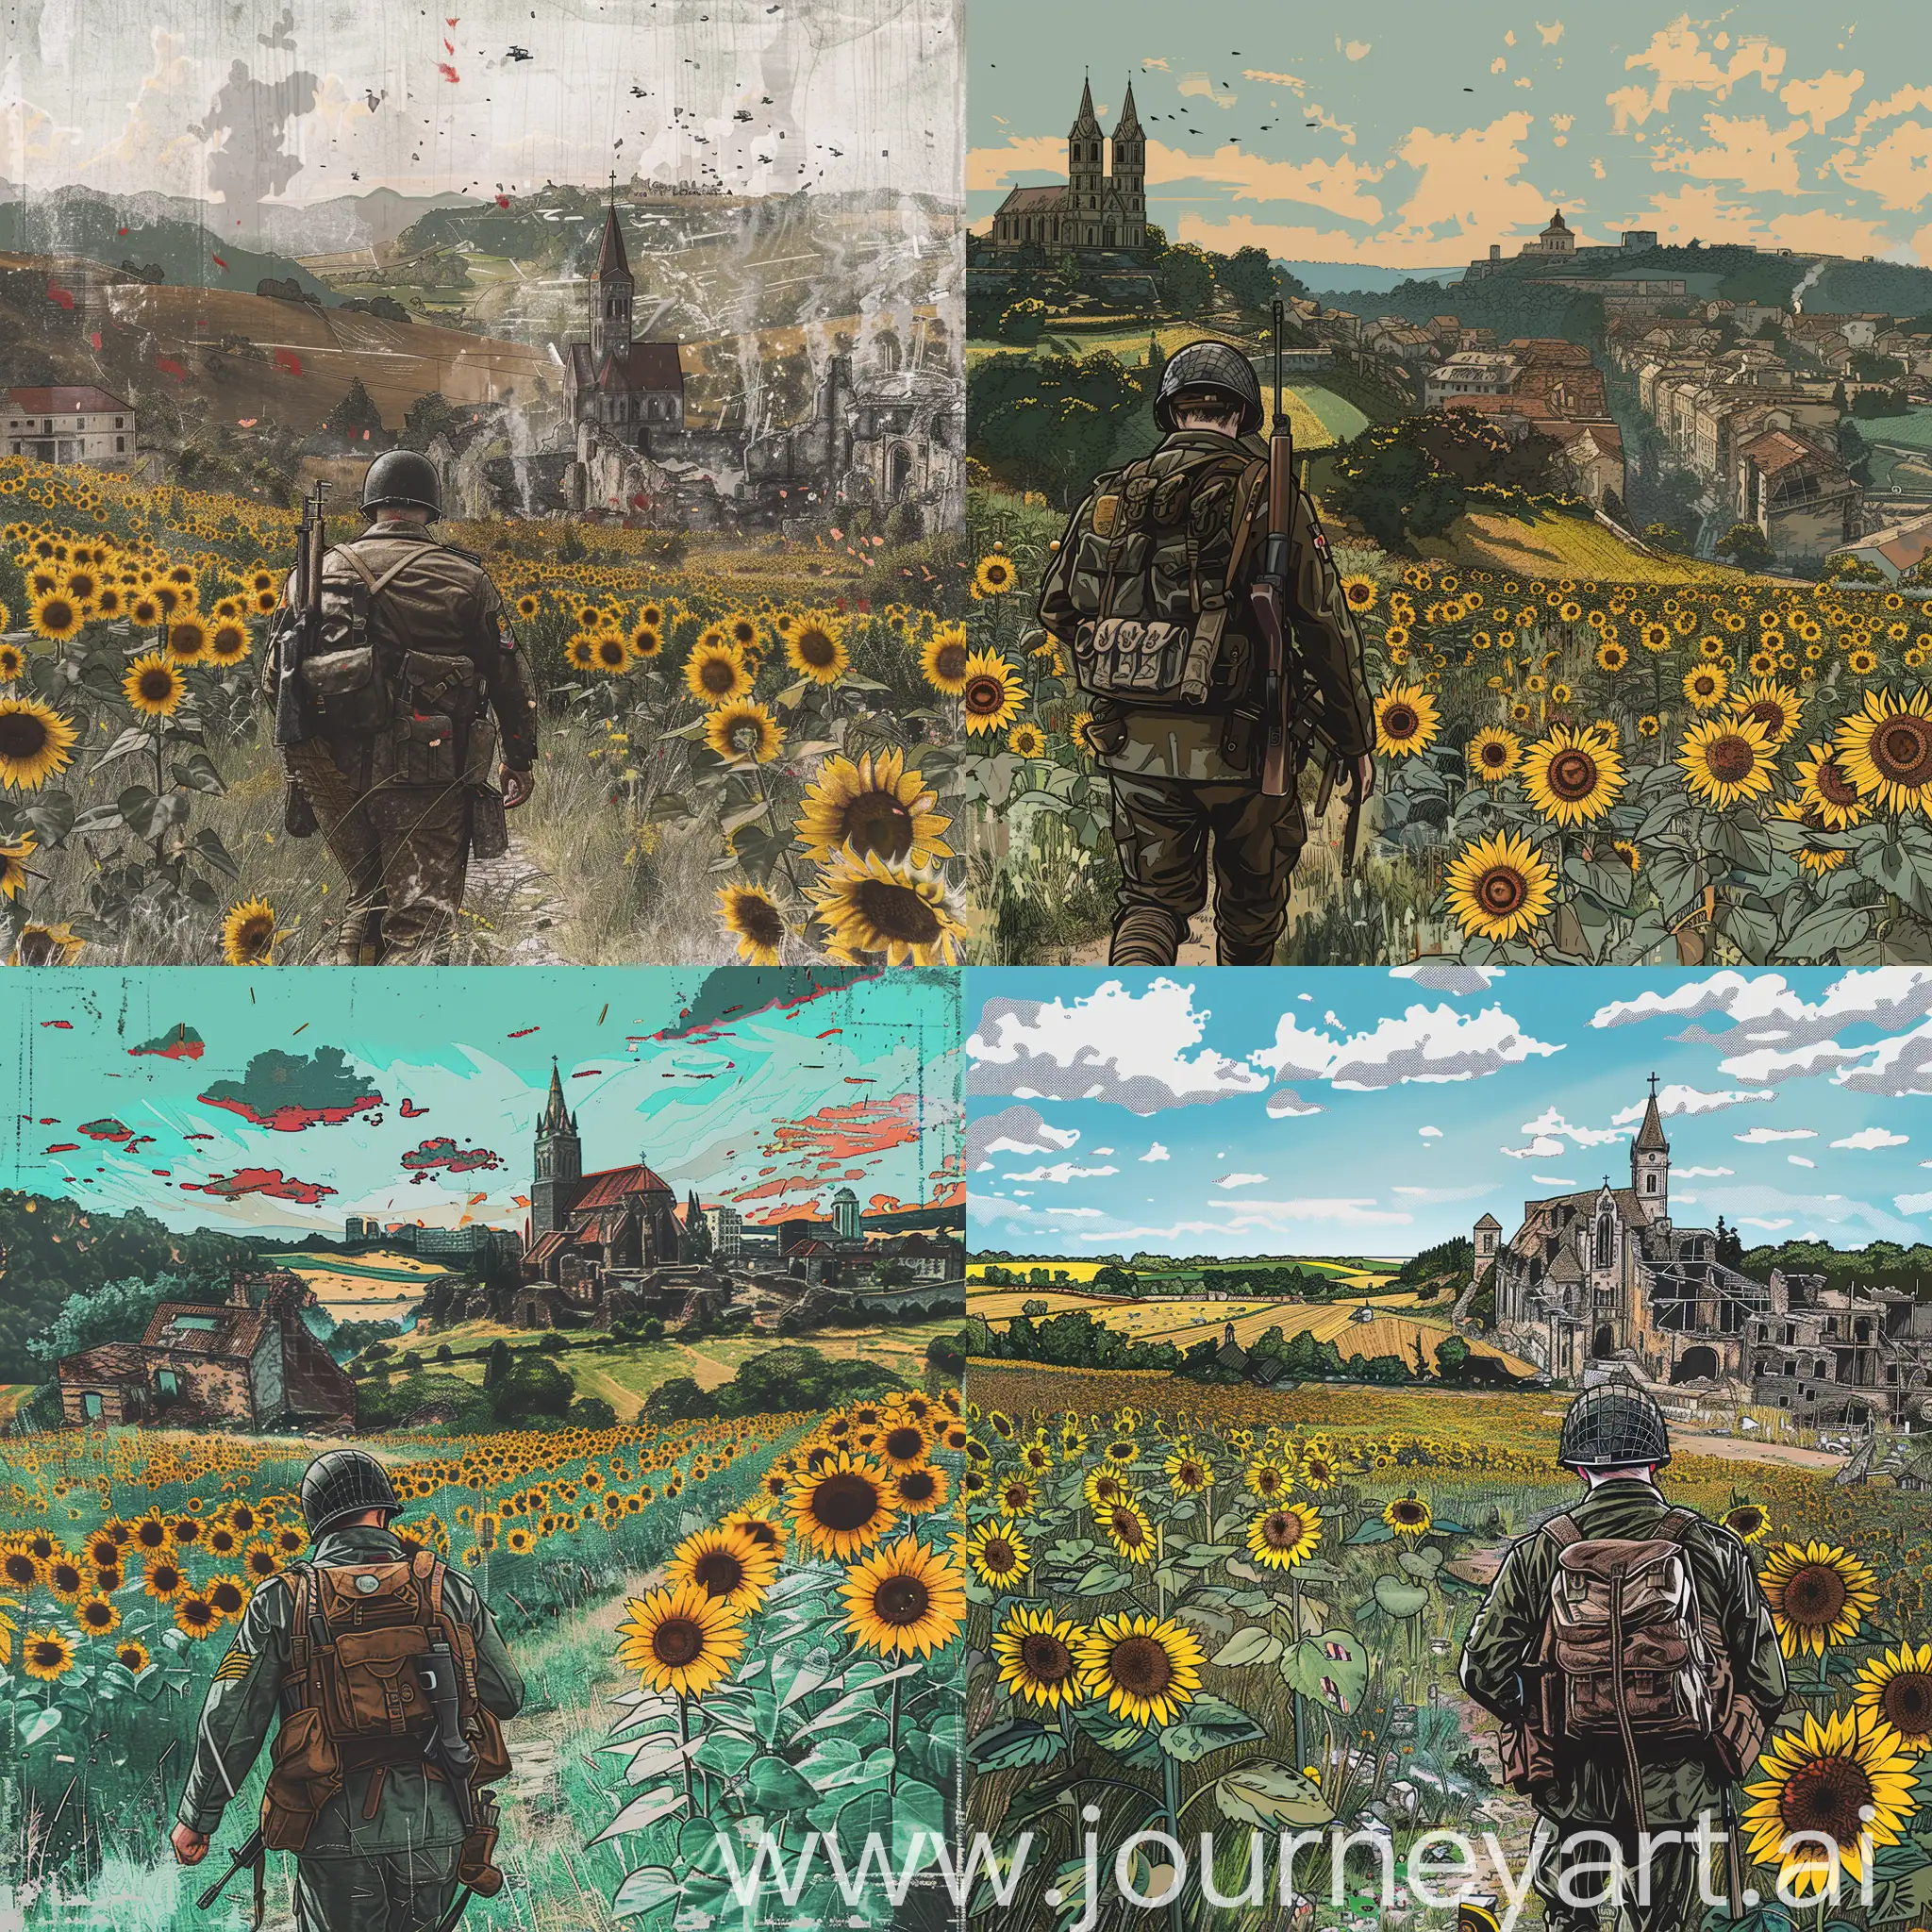 A soldier dressed in a uniform from the Second World War from the game Battlefield V walks through a field of sunflowers, and far ahead stands an old dilapidated church, and on the right a dilapidated city in a digital doodle style